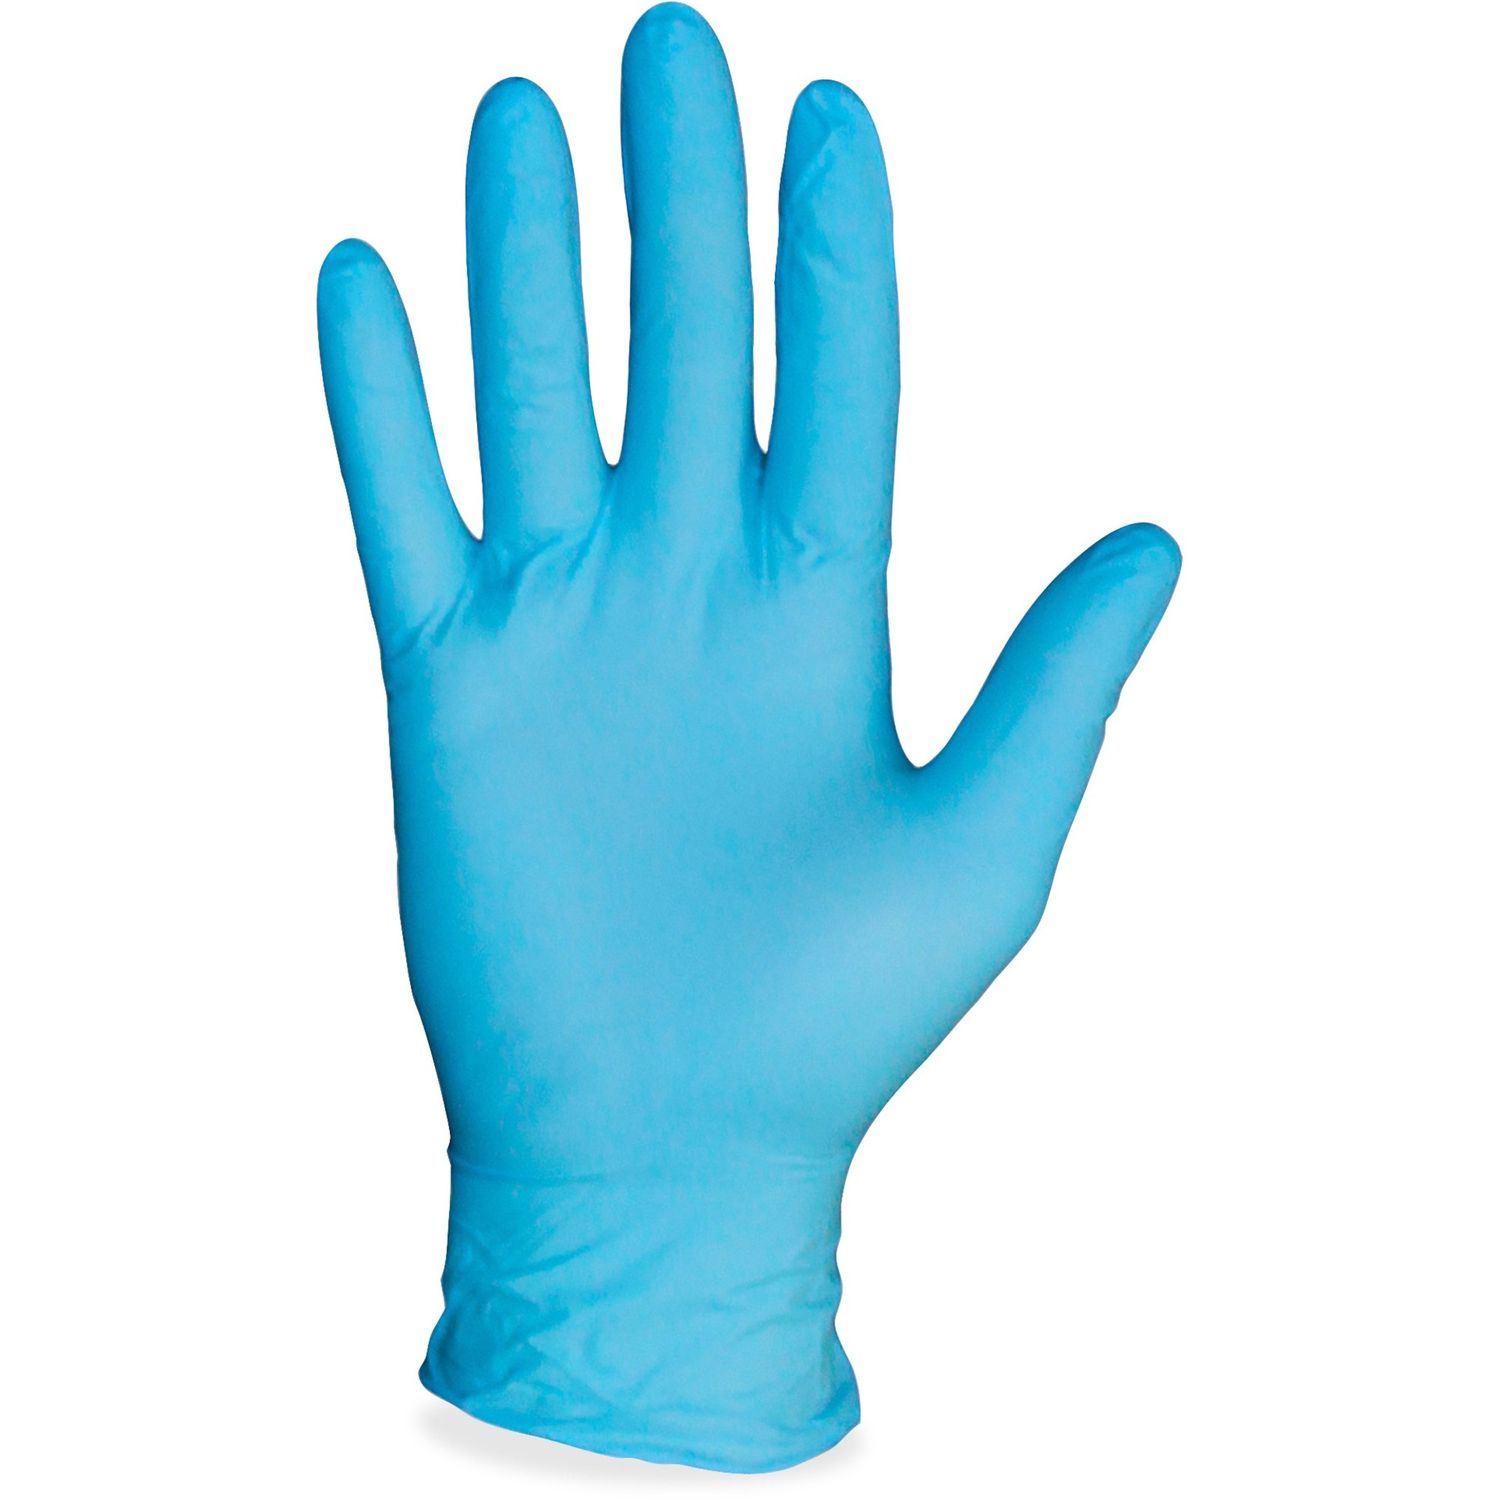 PF Nitrile General Purpose Gloves Chemical Protection, X-Large Size, Nitrile, Blue, Beaded Cuff, Textured Grip, Puncture Resistant, Powder-free, Ambidextrous, Disposable, Comfortable